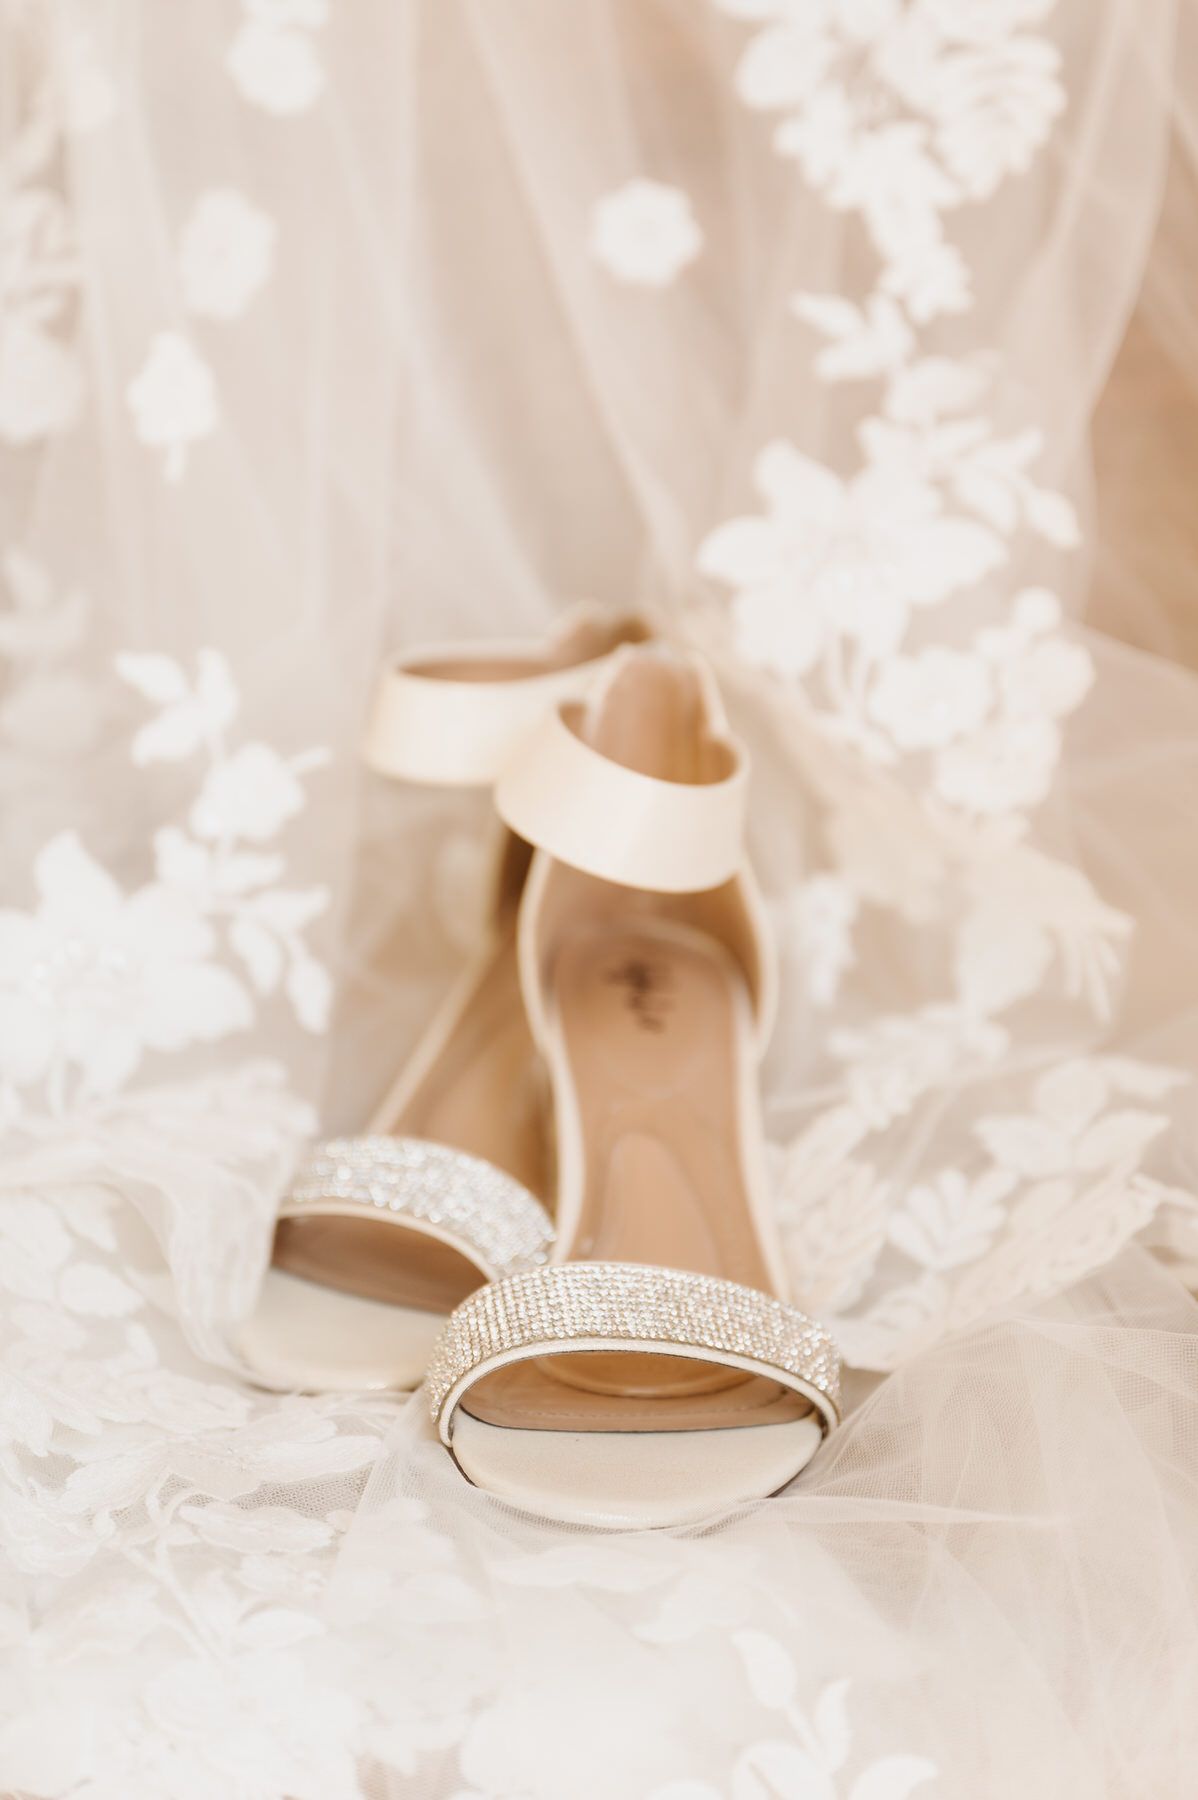 A pair of wedding shoes sitting on top of a wedding dress.